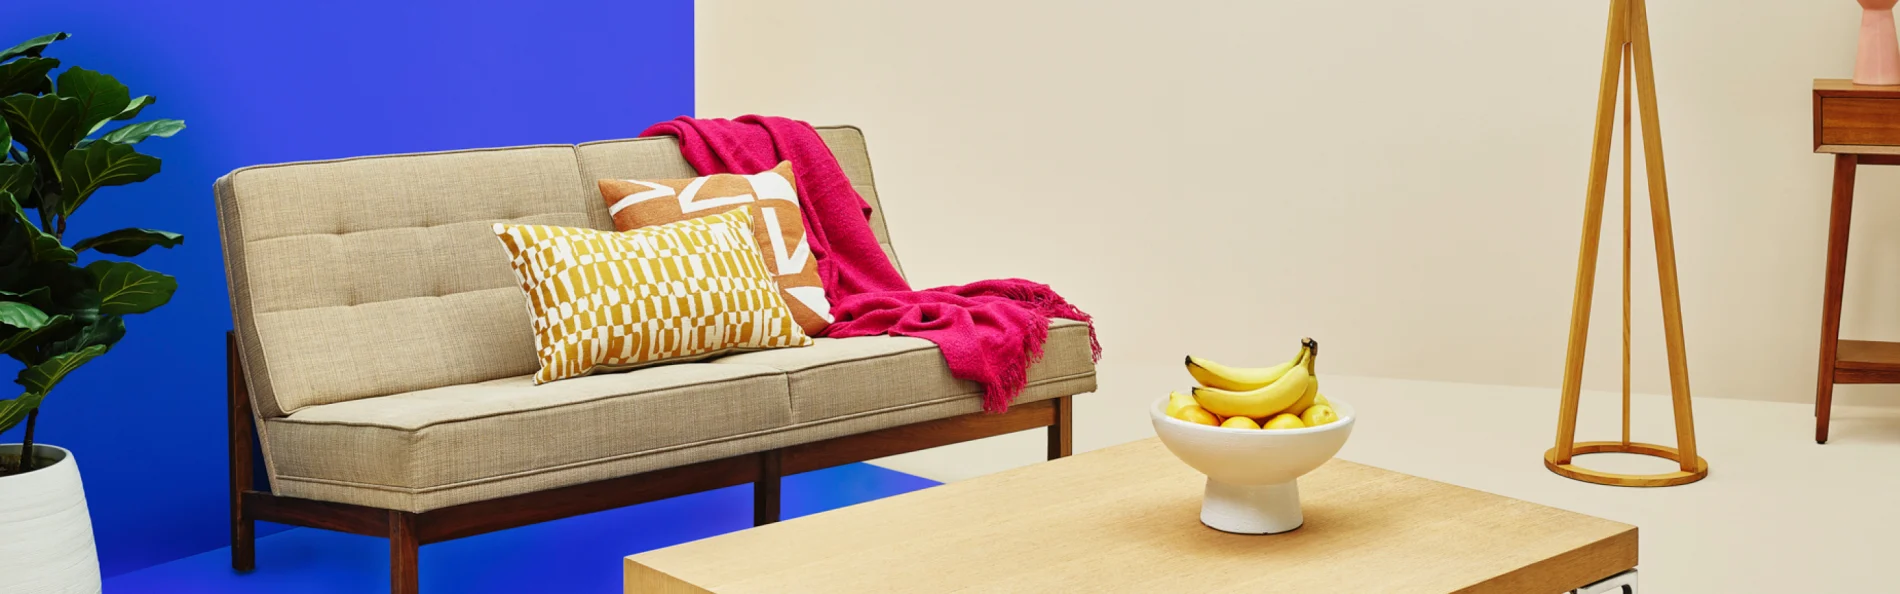 image of a couch with fruit in a bowl on coffee table